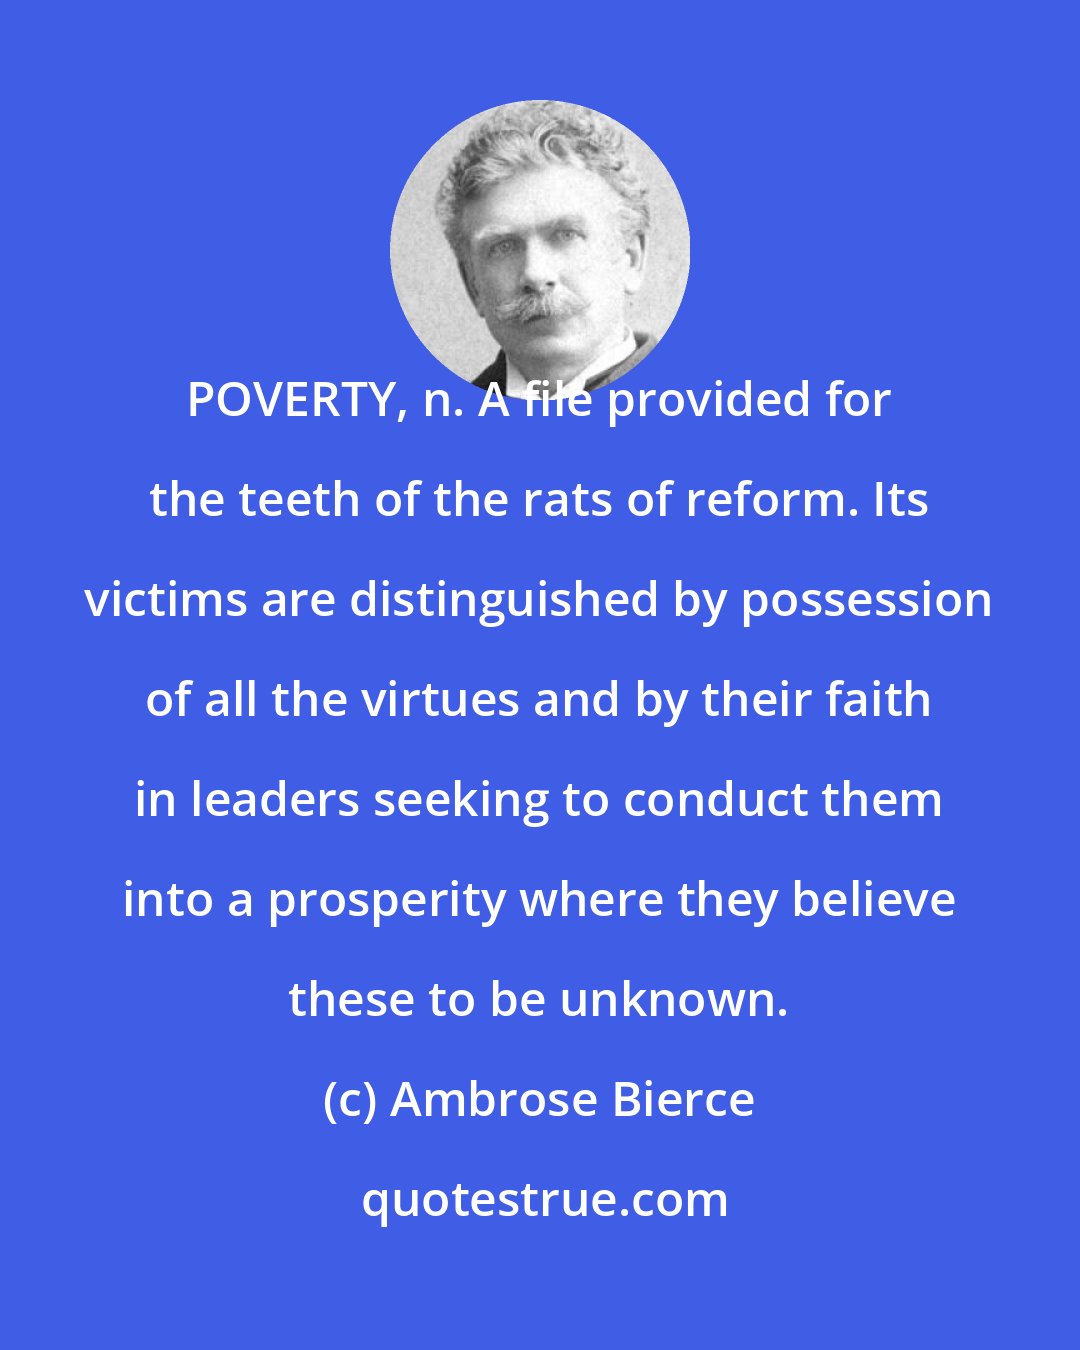 Ambrose Bierce: POVERTY, n. A file provided for the teeth of the rats of reform. Its victims are distinguished by possession of all the virtues and by their faith in leaders seeking to conduct them into a prosperity where they believe these to be unknown.